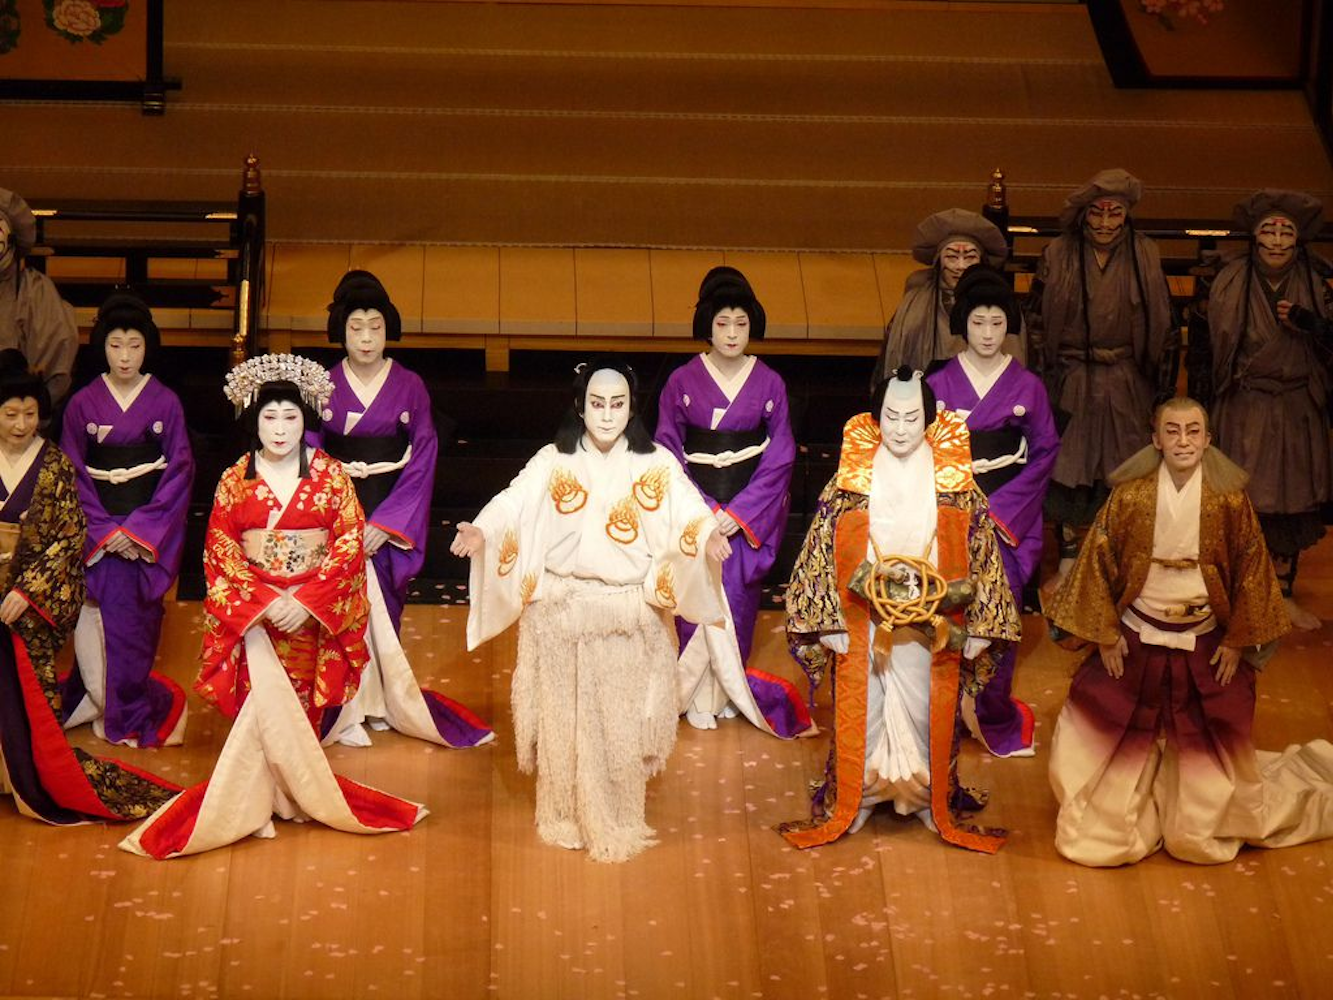 A captivating ensemble of theater artists, adorned in exquisite traditional Japanese attire, captivatingly performing a mesmerizing show.